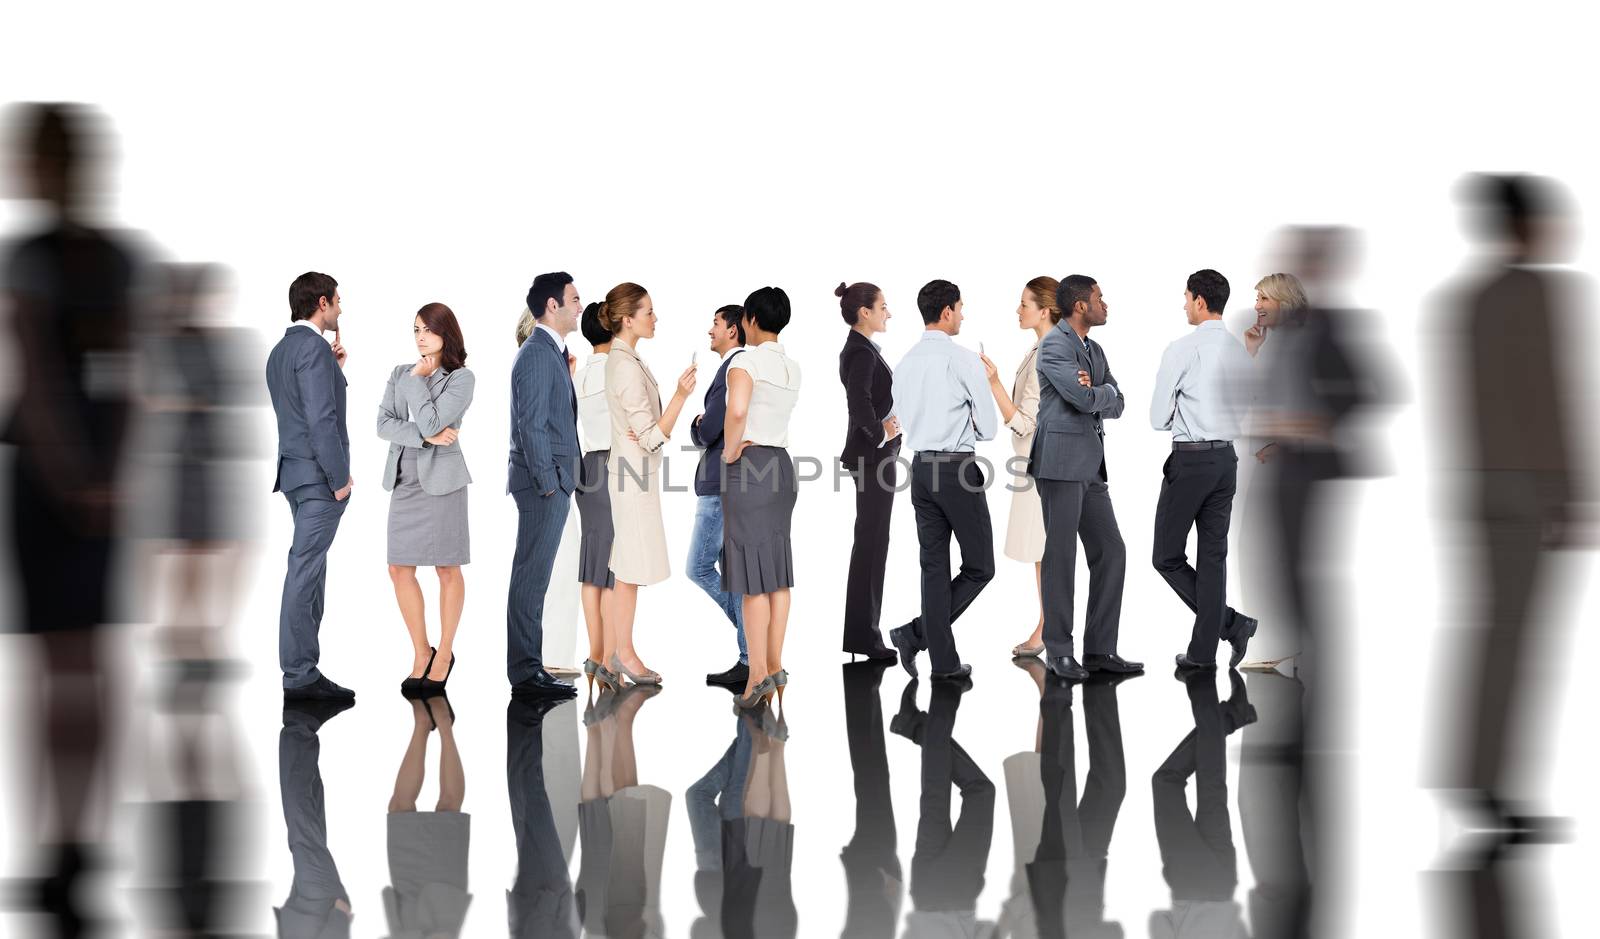 Composite image of many business people standing in a line by Wavebreakmedia